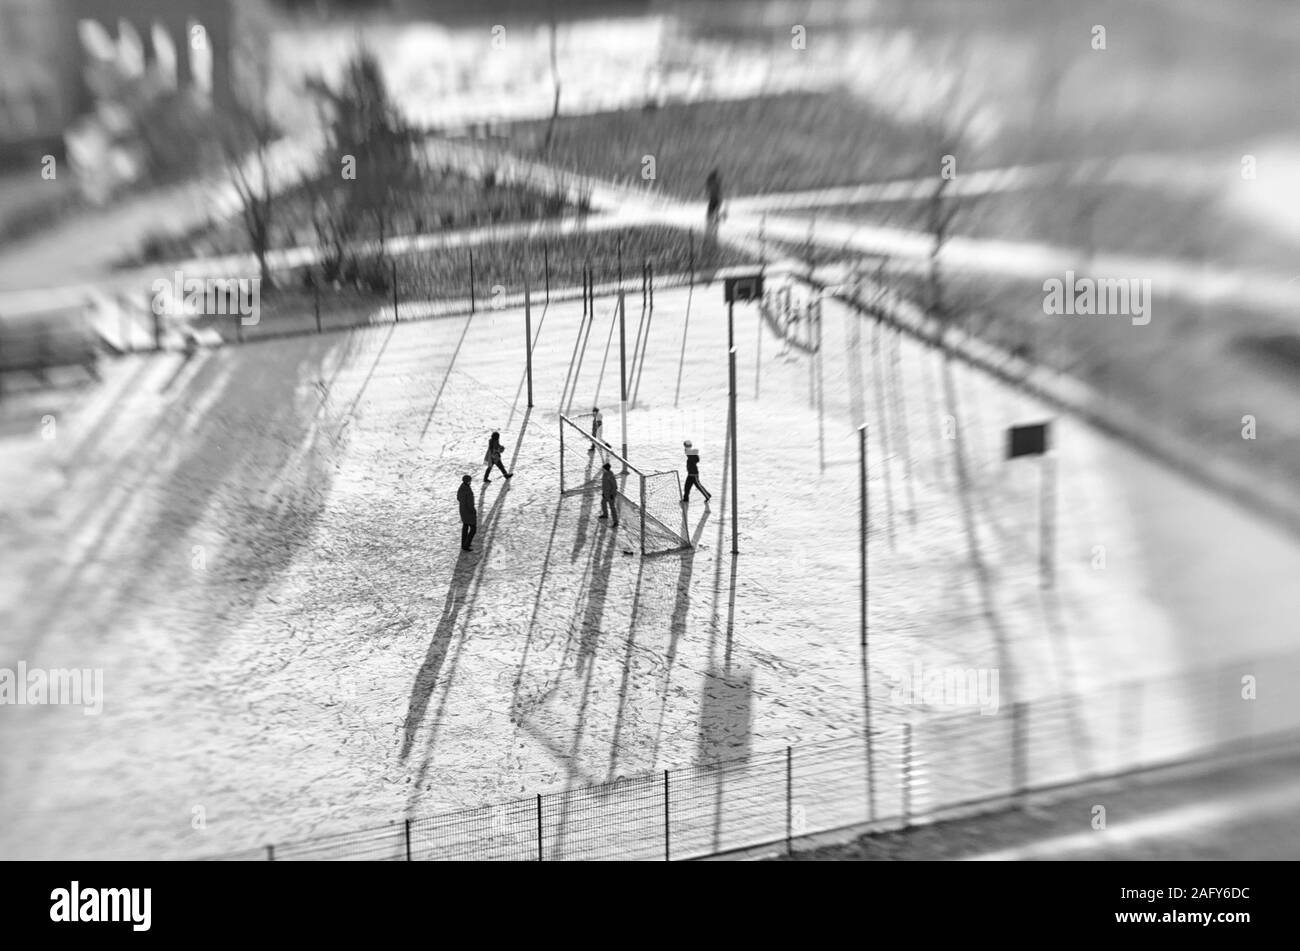 Unidentified children and an adult in the distance play soccer in a snowy stadium in the sunshine tilt shift effect in the black and white style Stock Photo